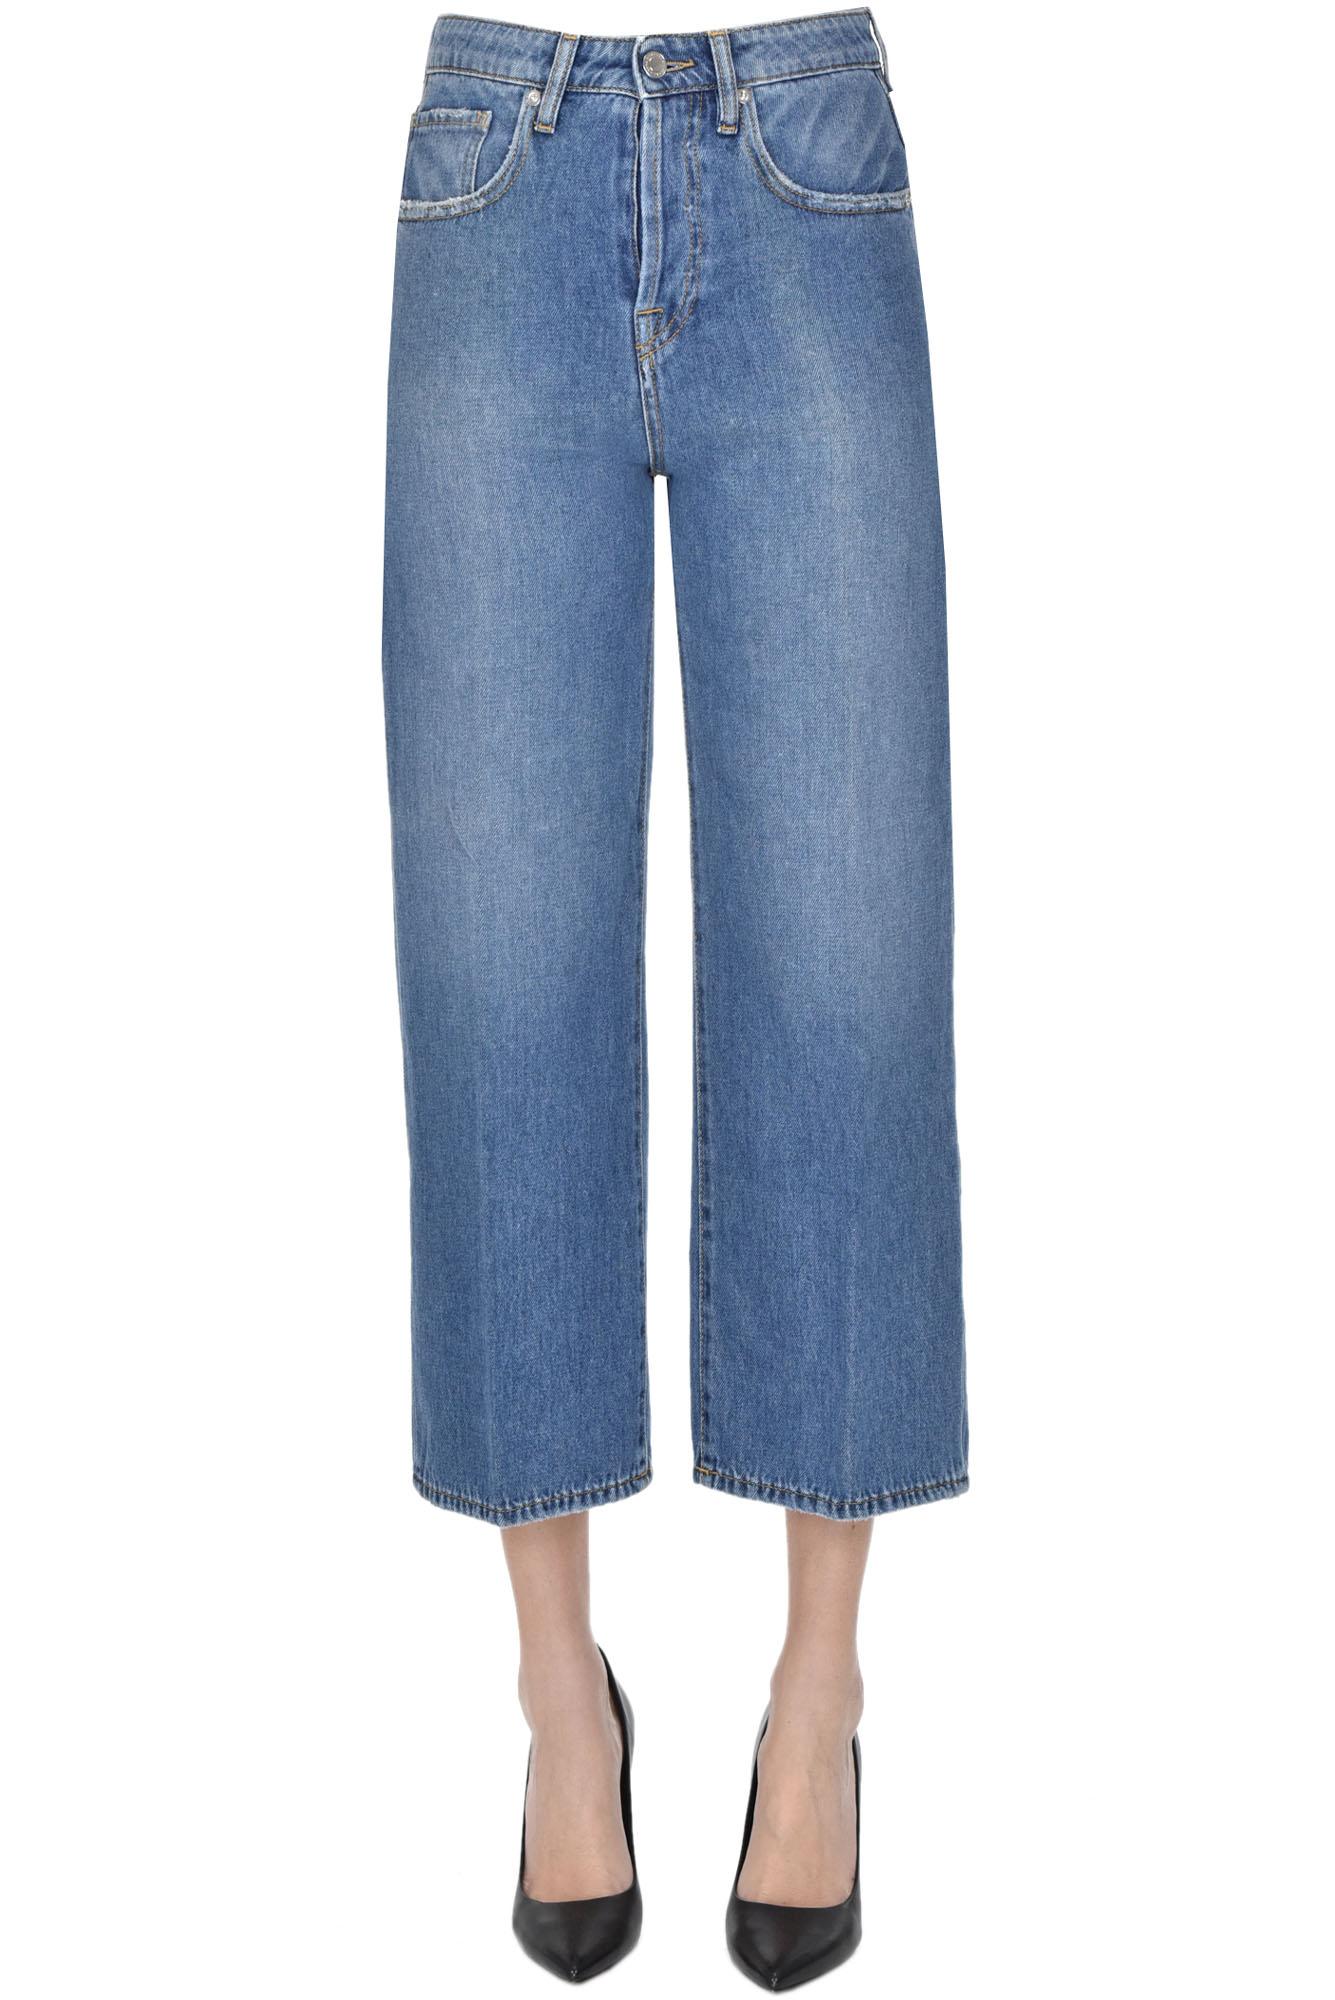 TRUE NYC Cropped Jeans in Blue | Lyst